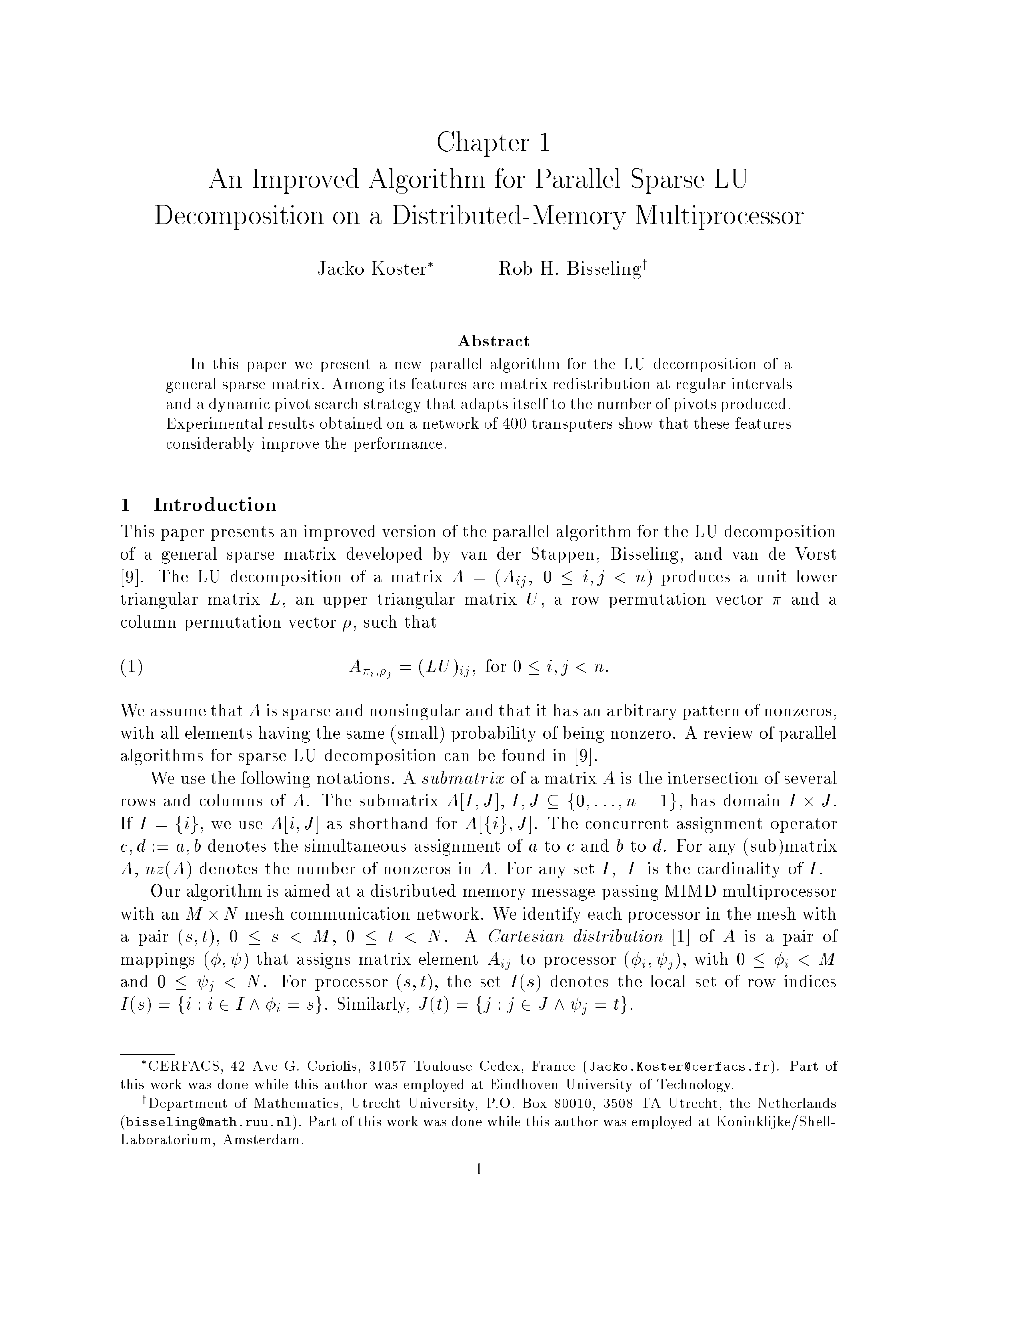 Chapter 1 an Improved Algorithm for Parallel Sparse LU Decomposition on a Distributed-Memory Multiprocessor